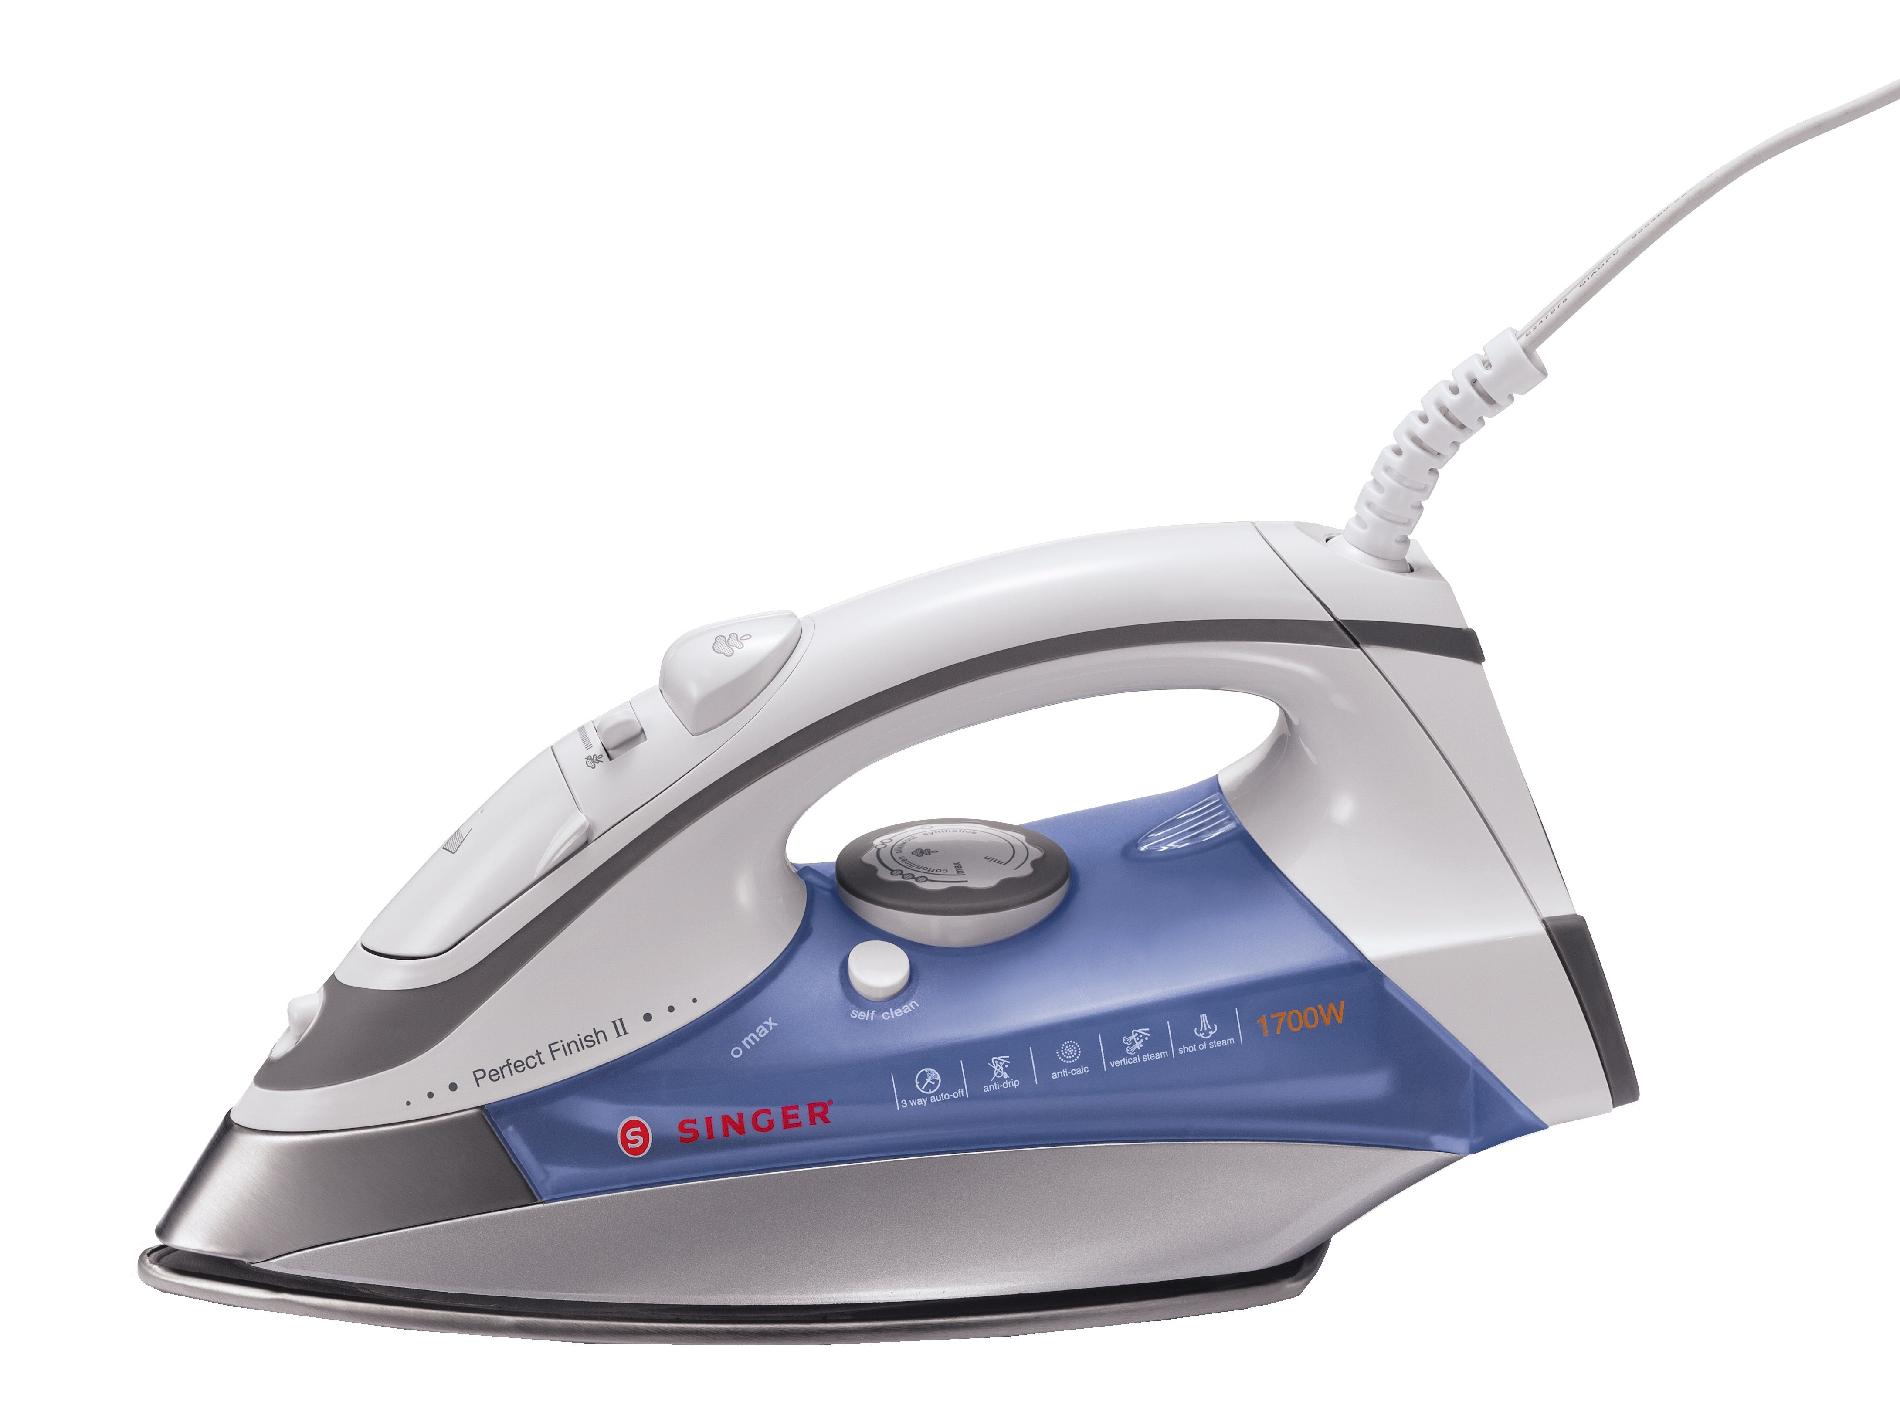 Perfect Finish Clothes Iron